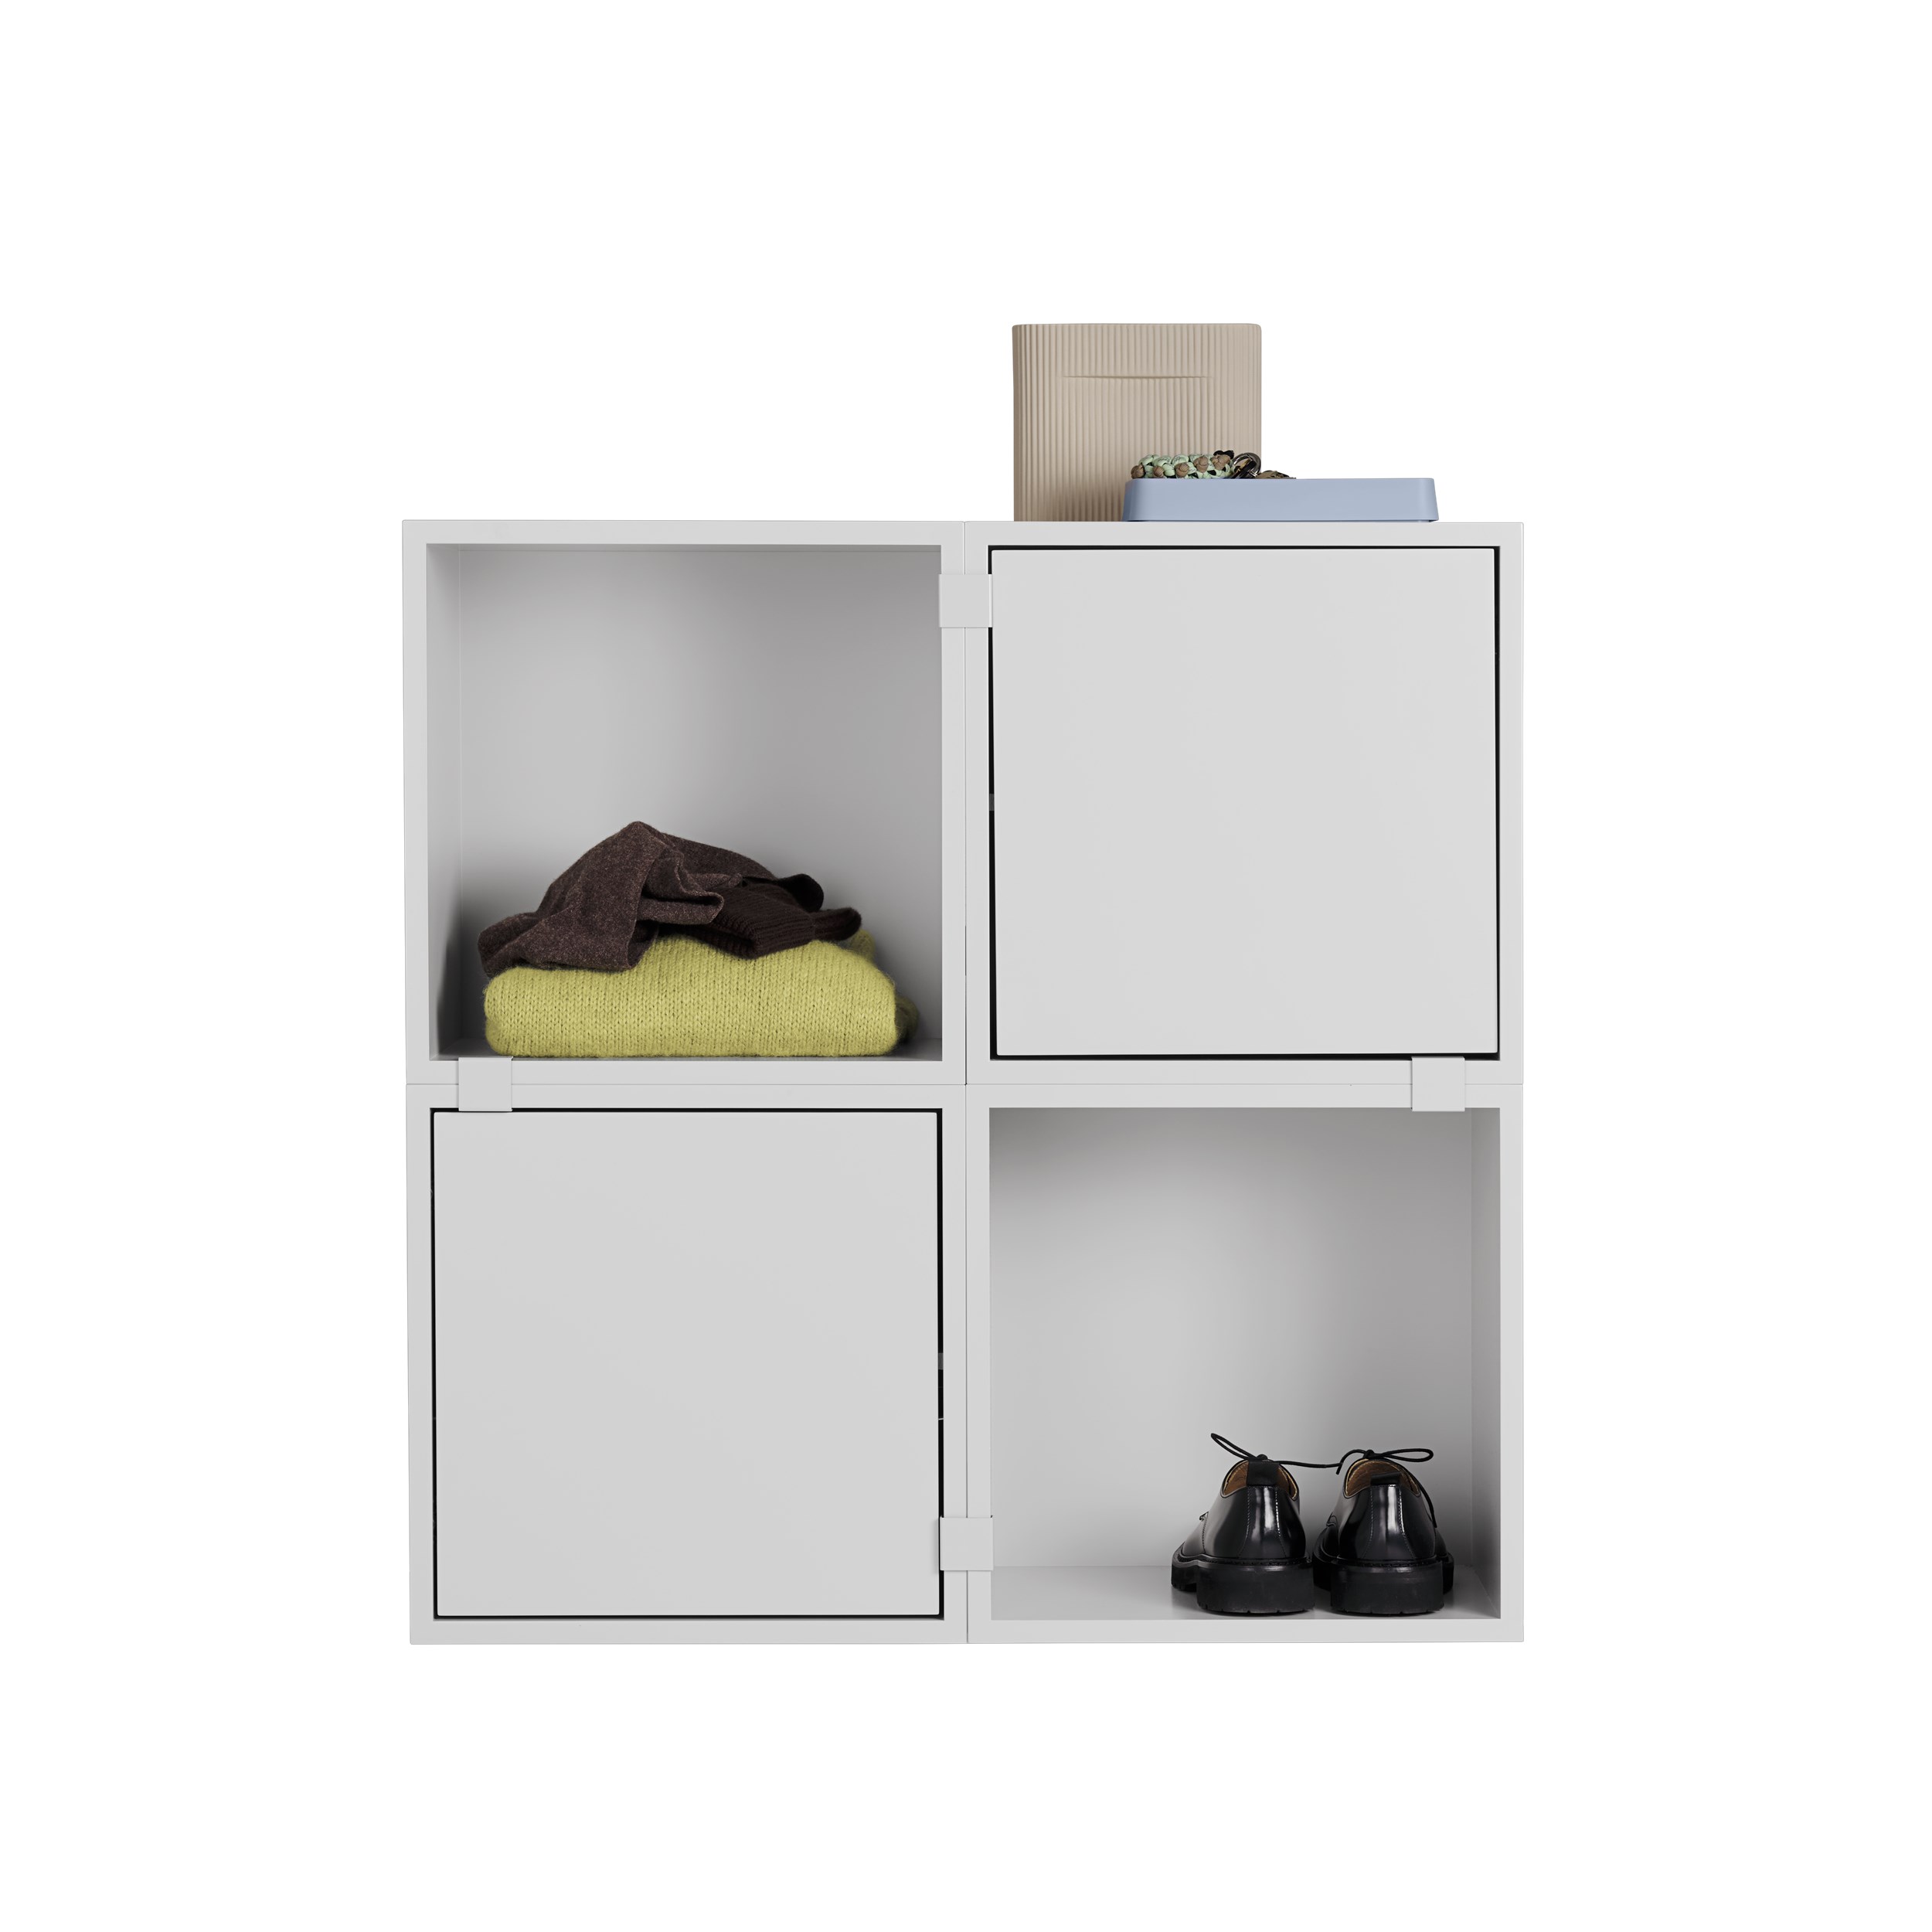 Stacked Hallway Storage Combination No 4, Wall Mounted.